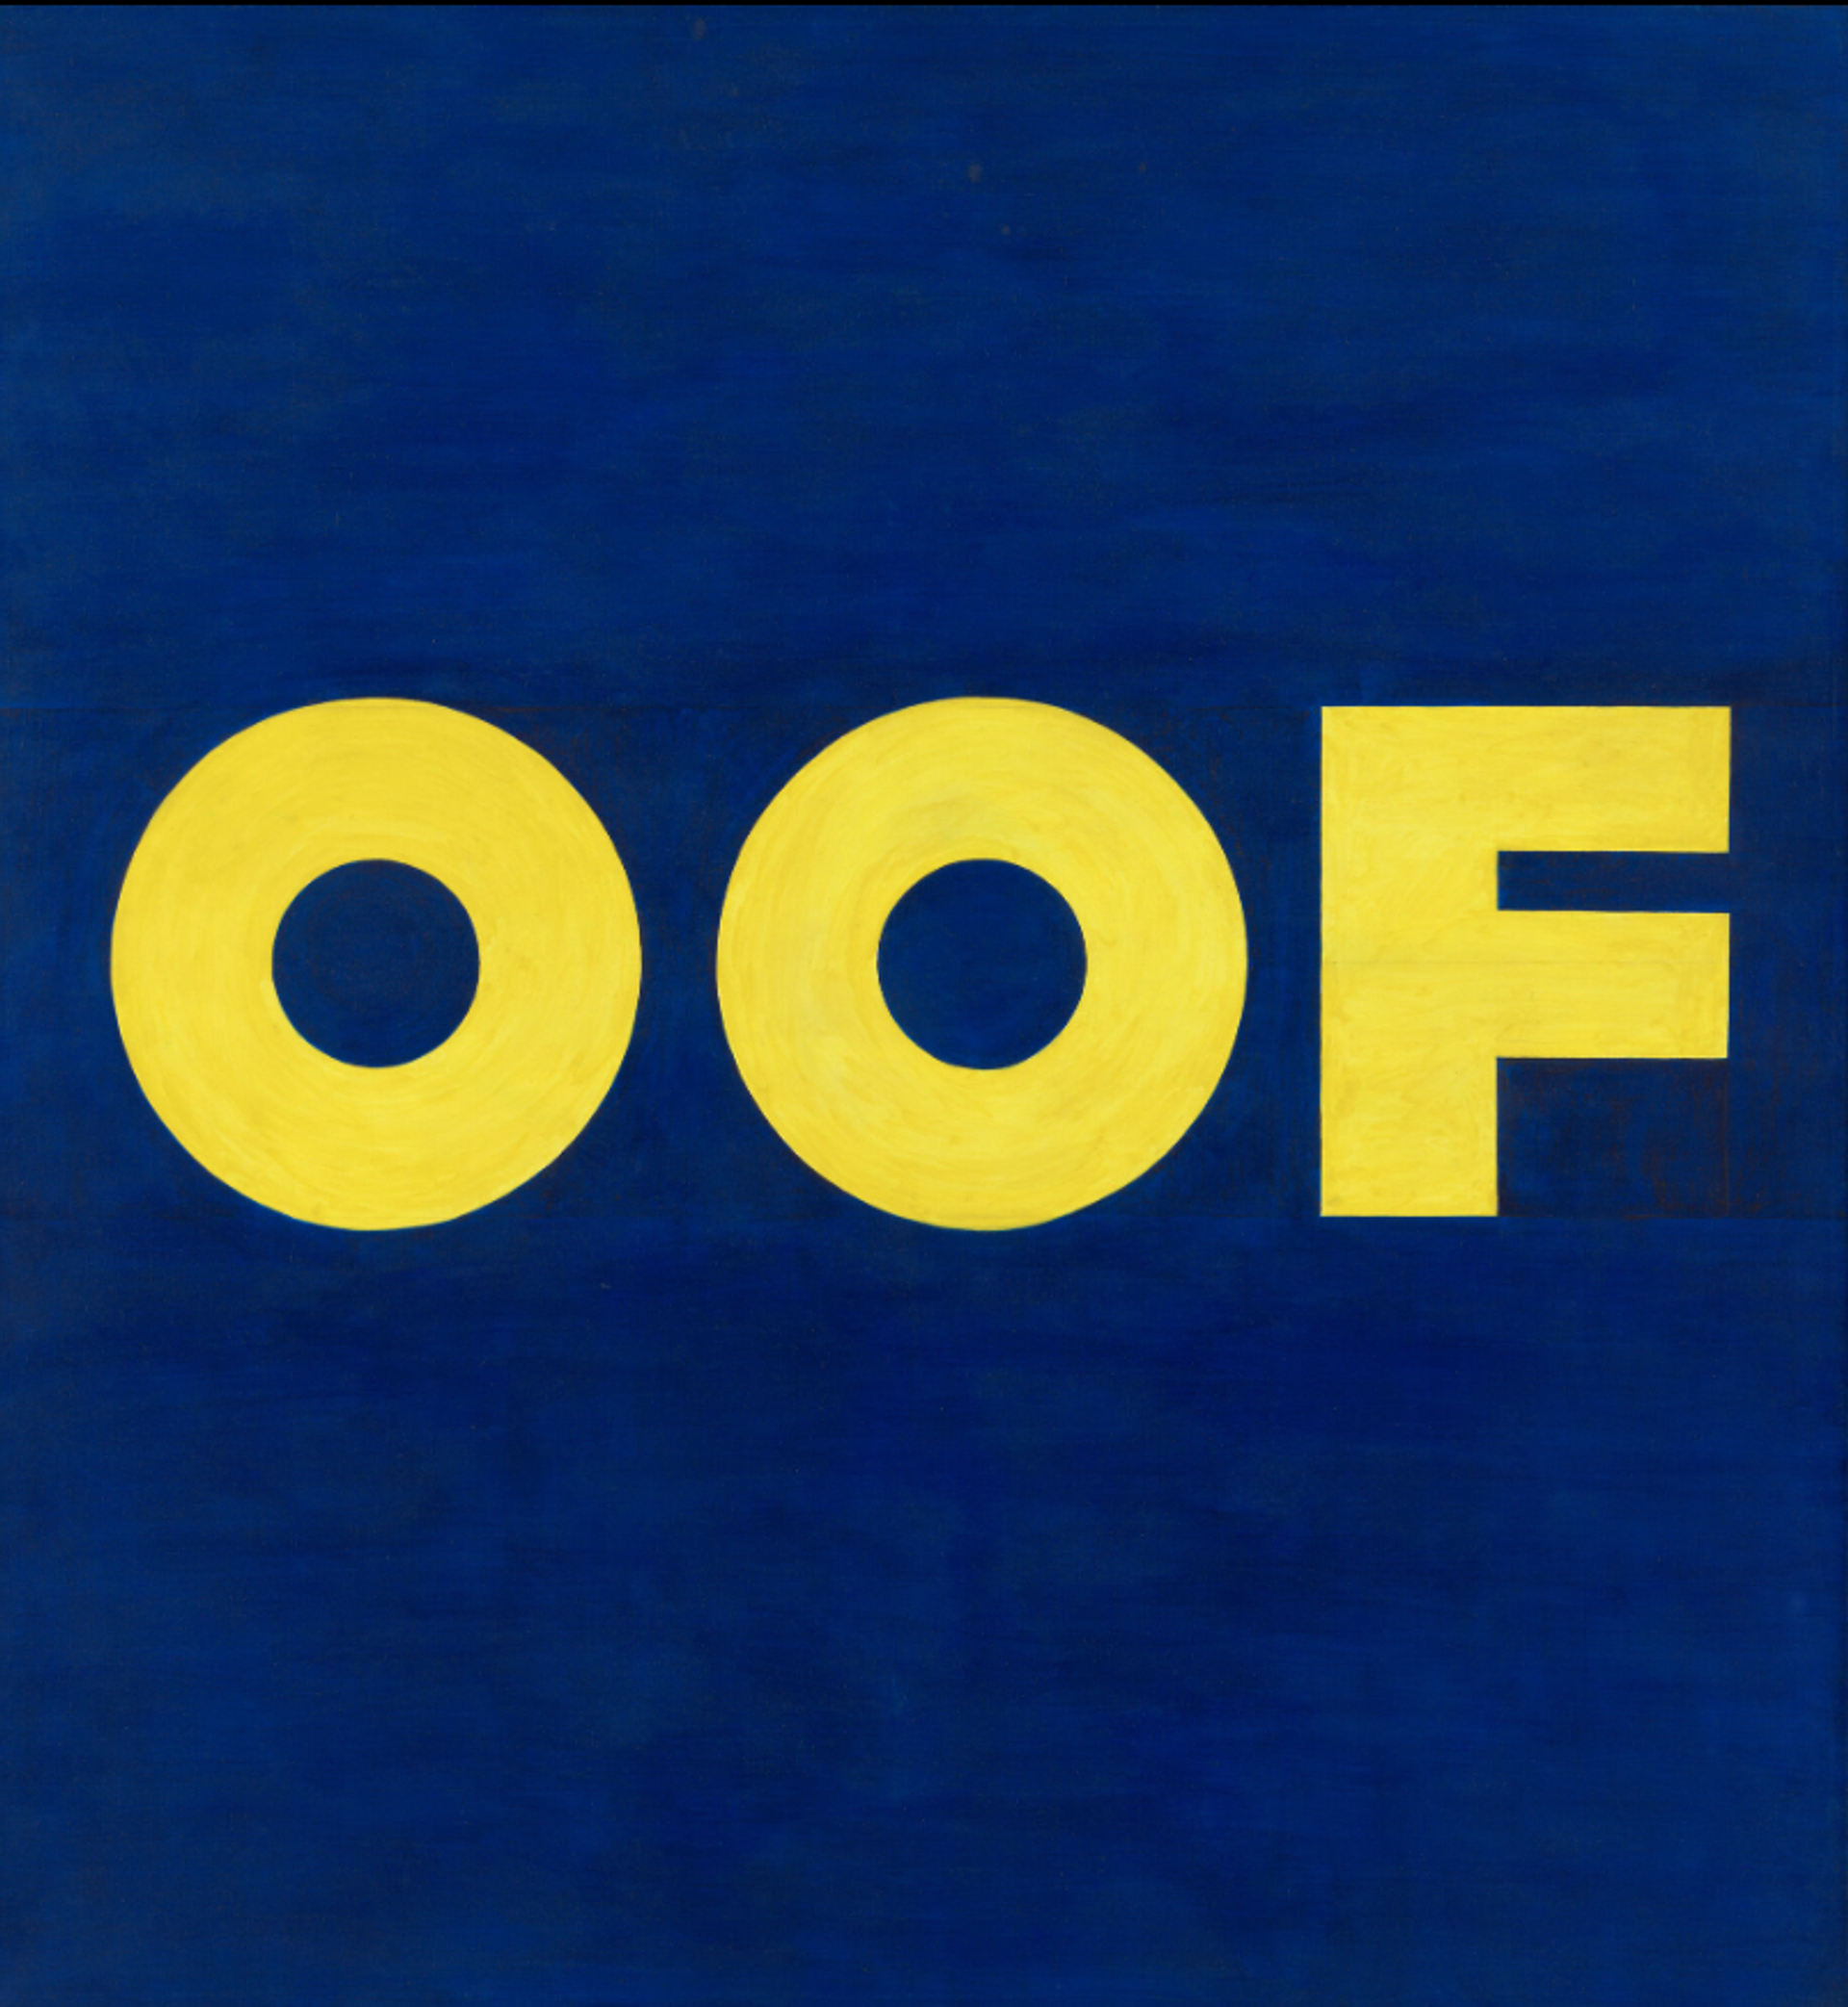 Painting by Ed Ruscha of the word 'OOF' in a capitalised, simple font, in bold yellow against a dimensional deep blue background.